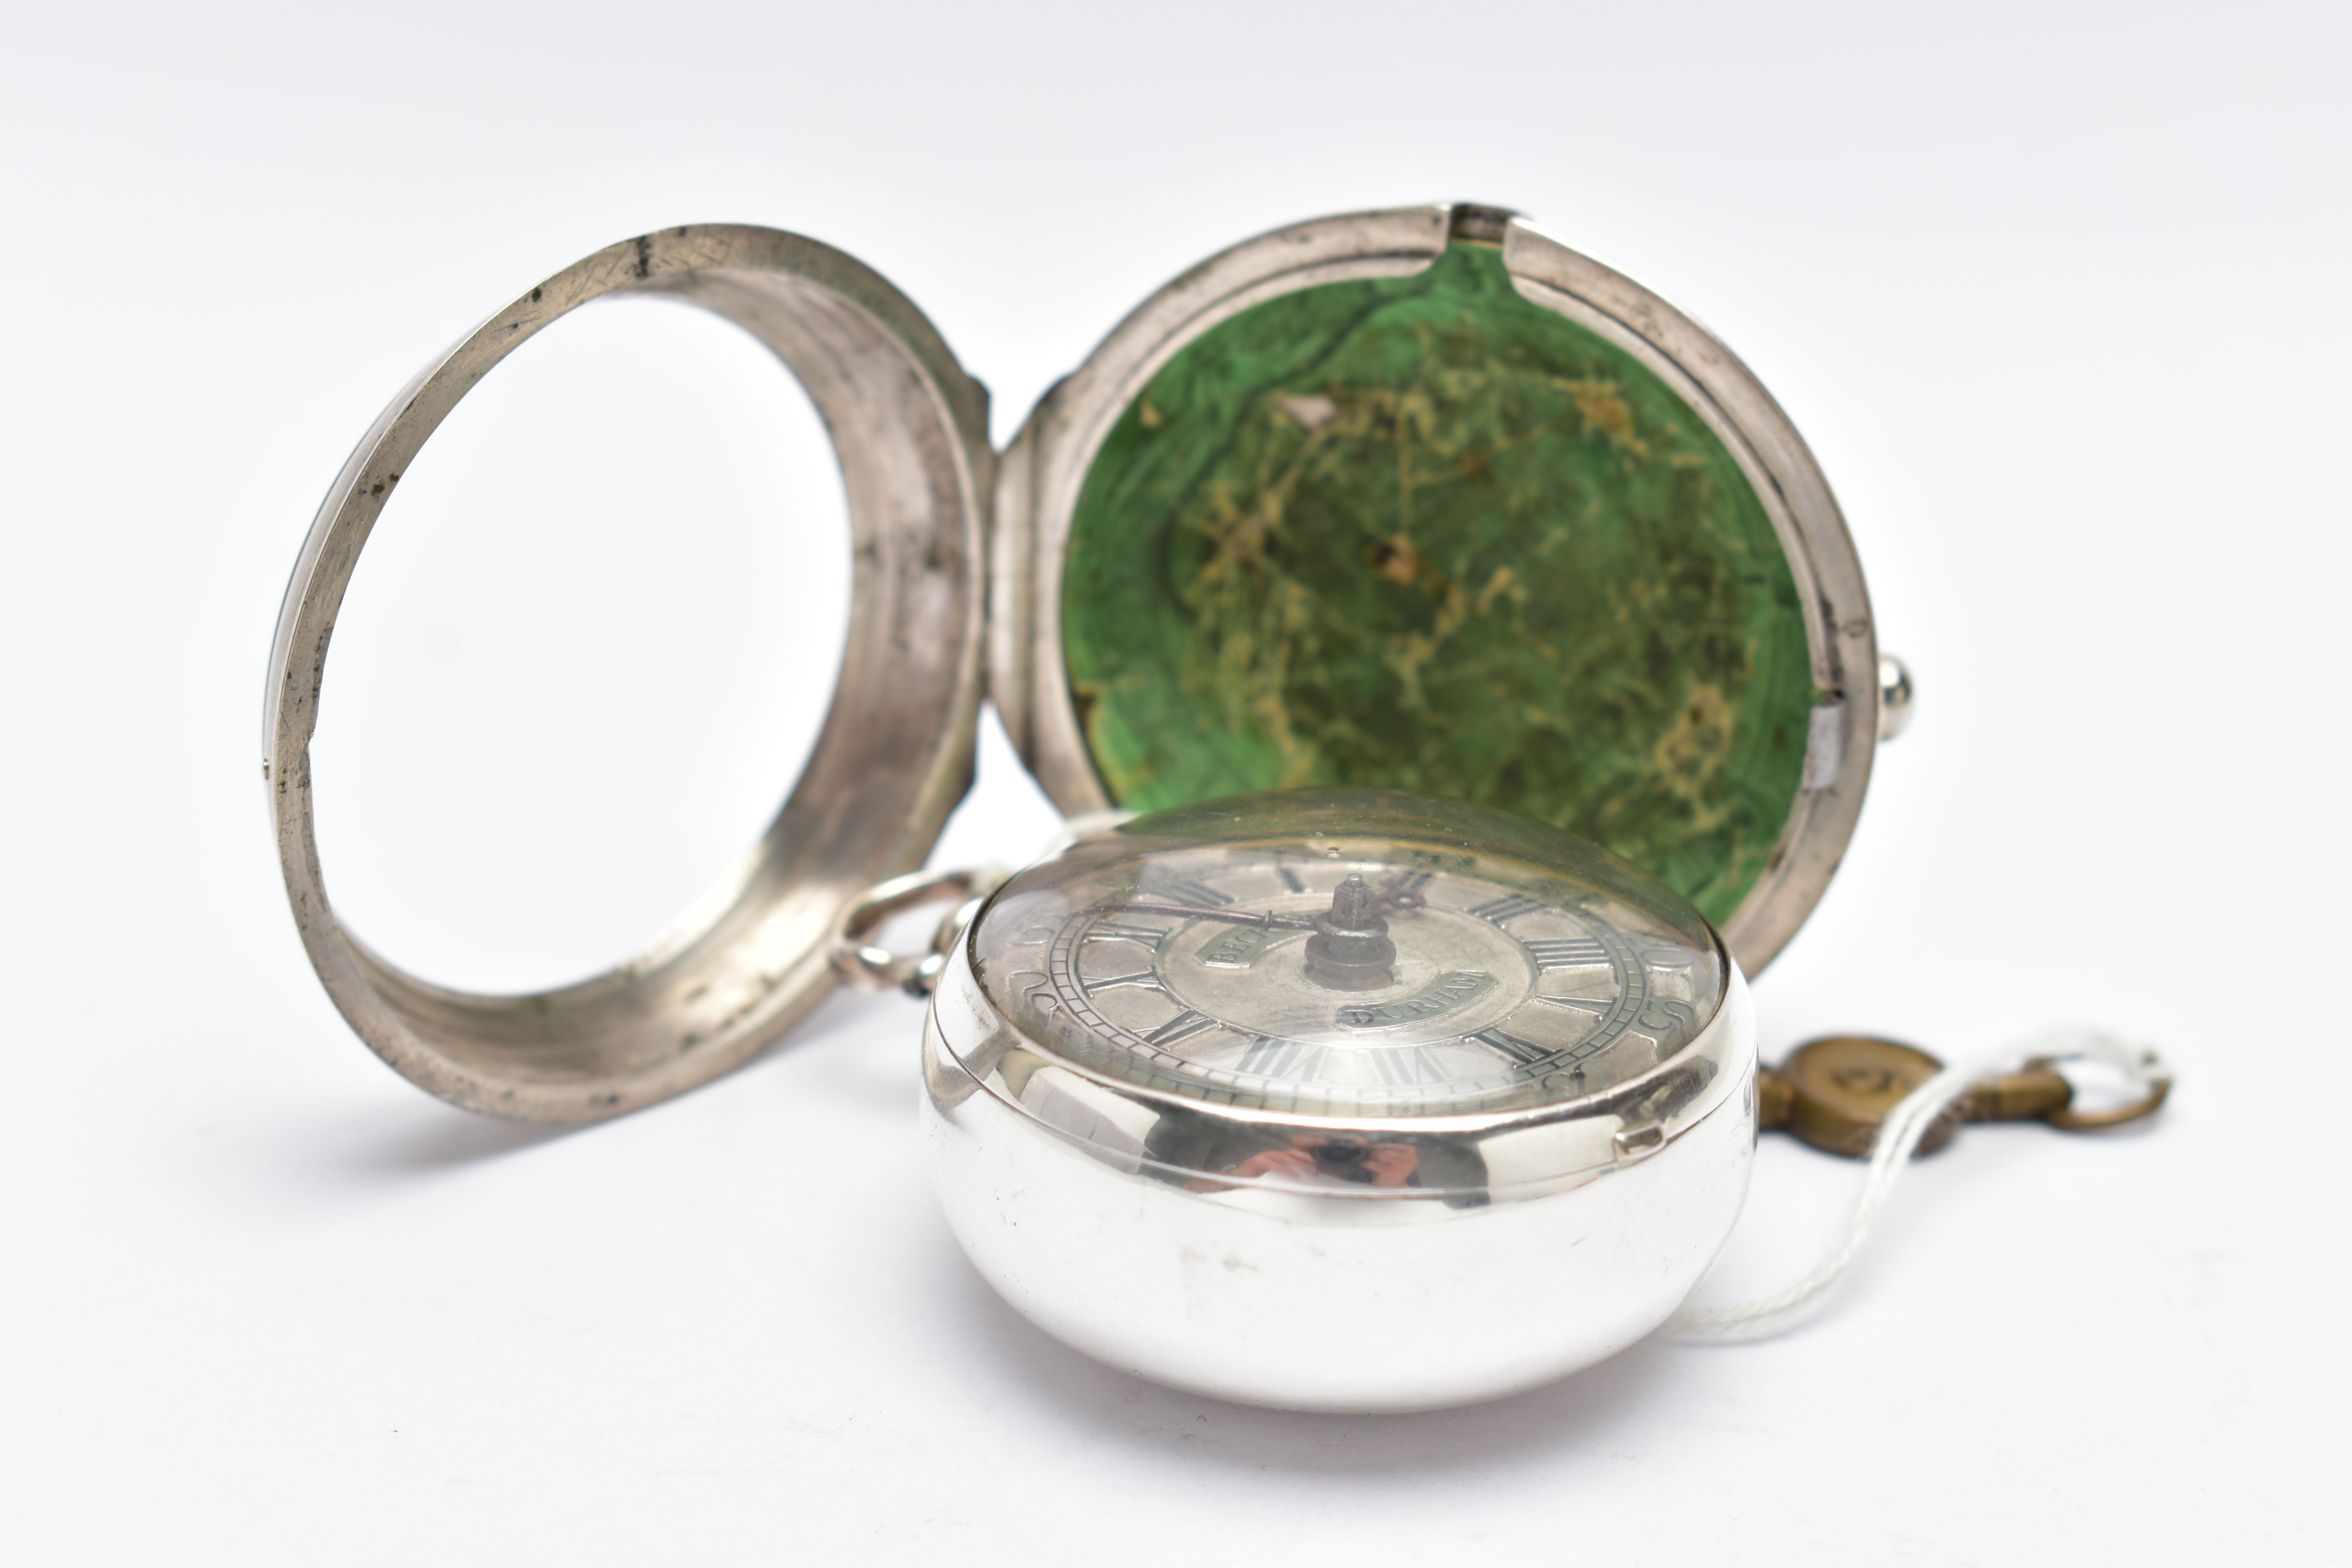 A GEORGE II SILVER PAIR CASED VERGE POCKET WATCH BY 'THOMAS BECKETT', key wound, round champleve - Image 3 of 11